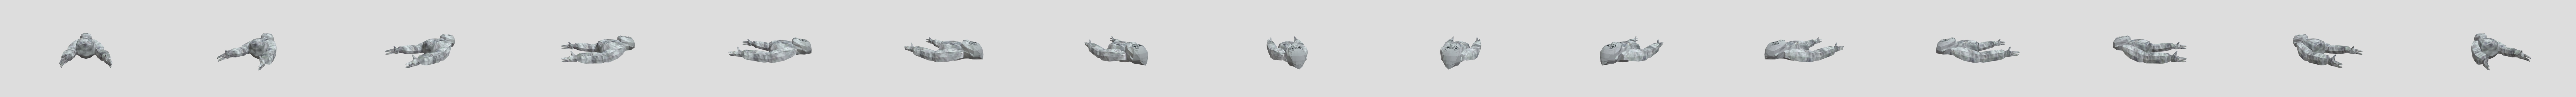 Gorilla Tag Lucy Ghost - Download Free 3D model by KPMisParrot